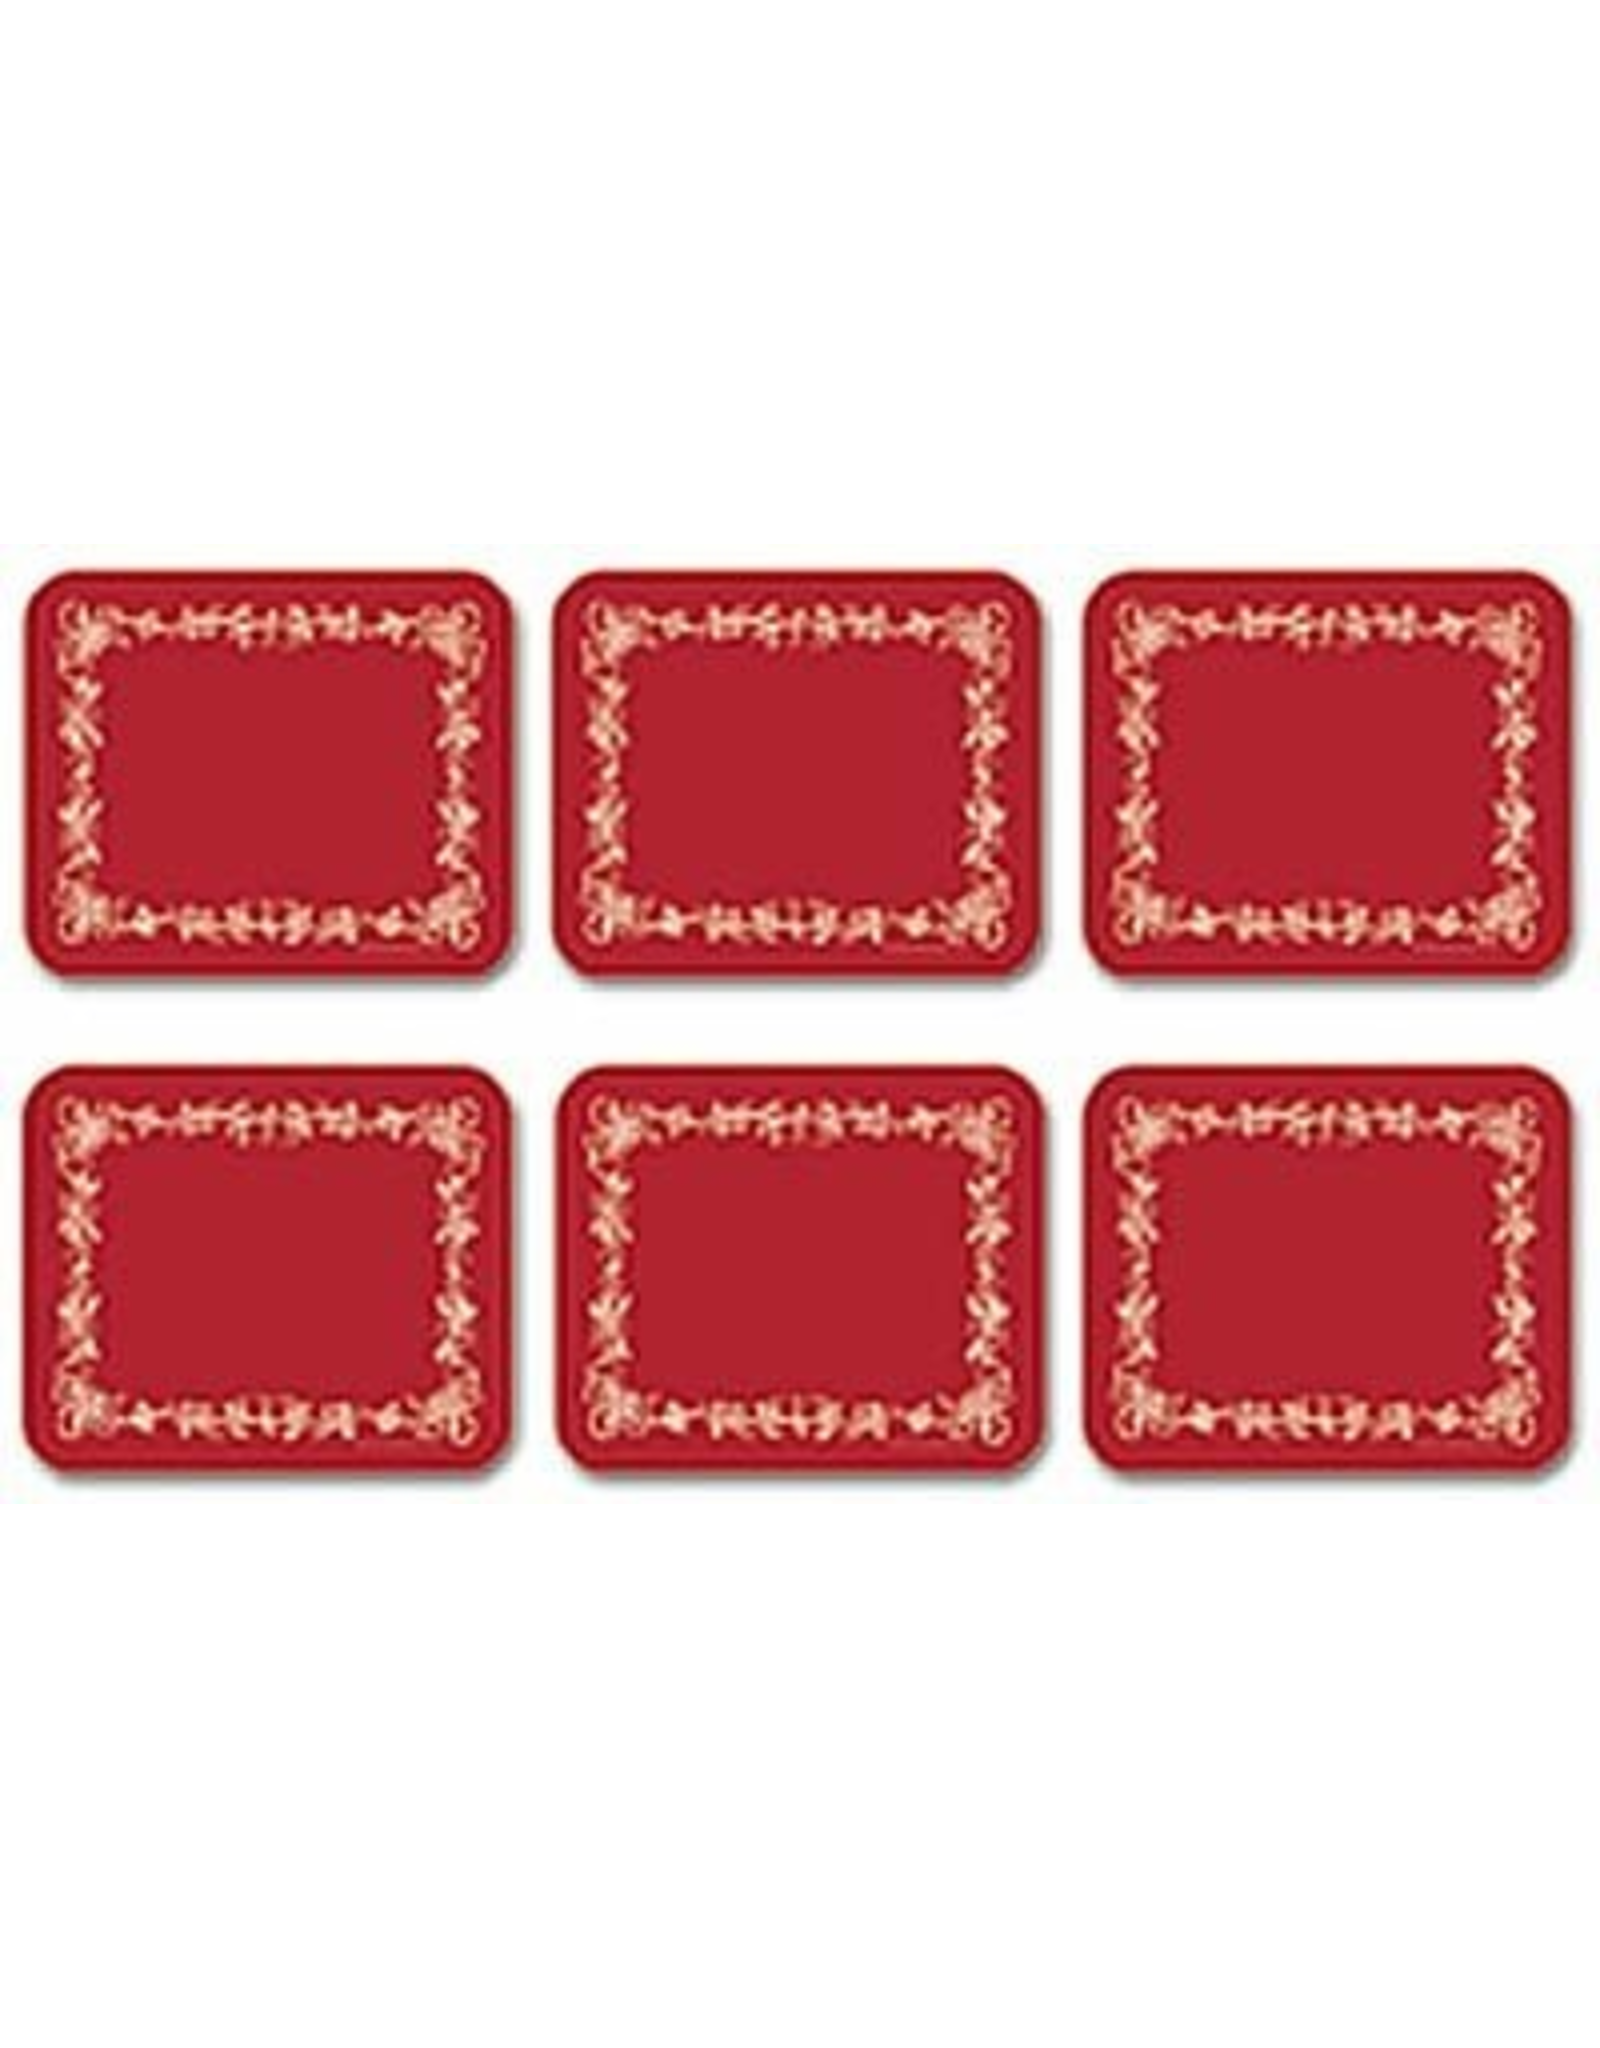 Jason Christmas Coasters Red W White Holly Berry Border Set of 6